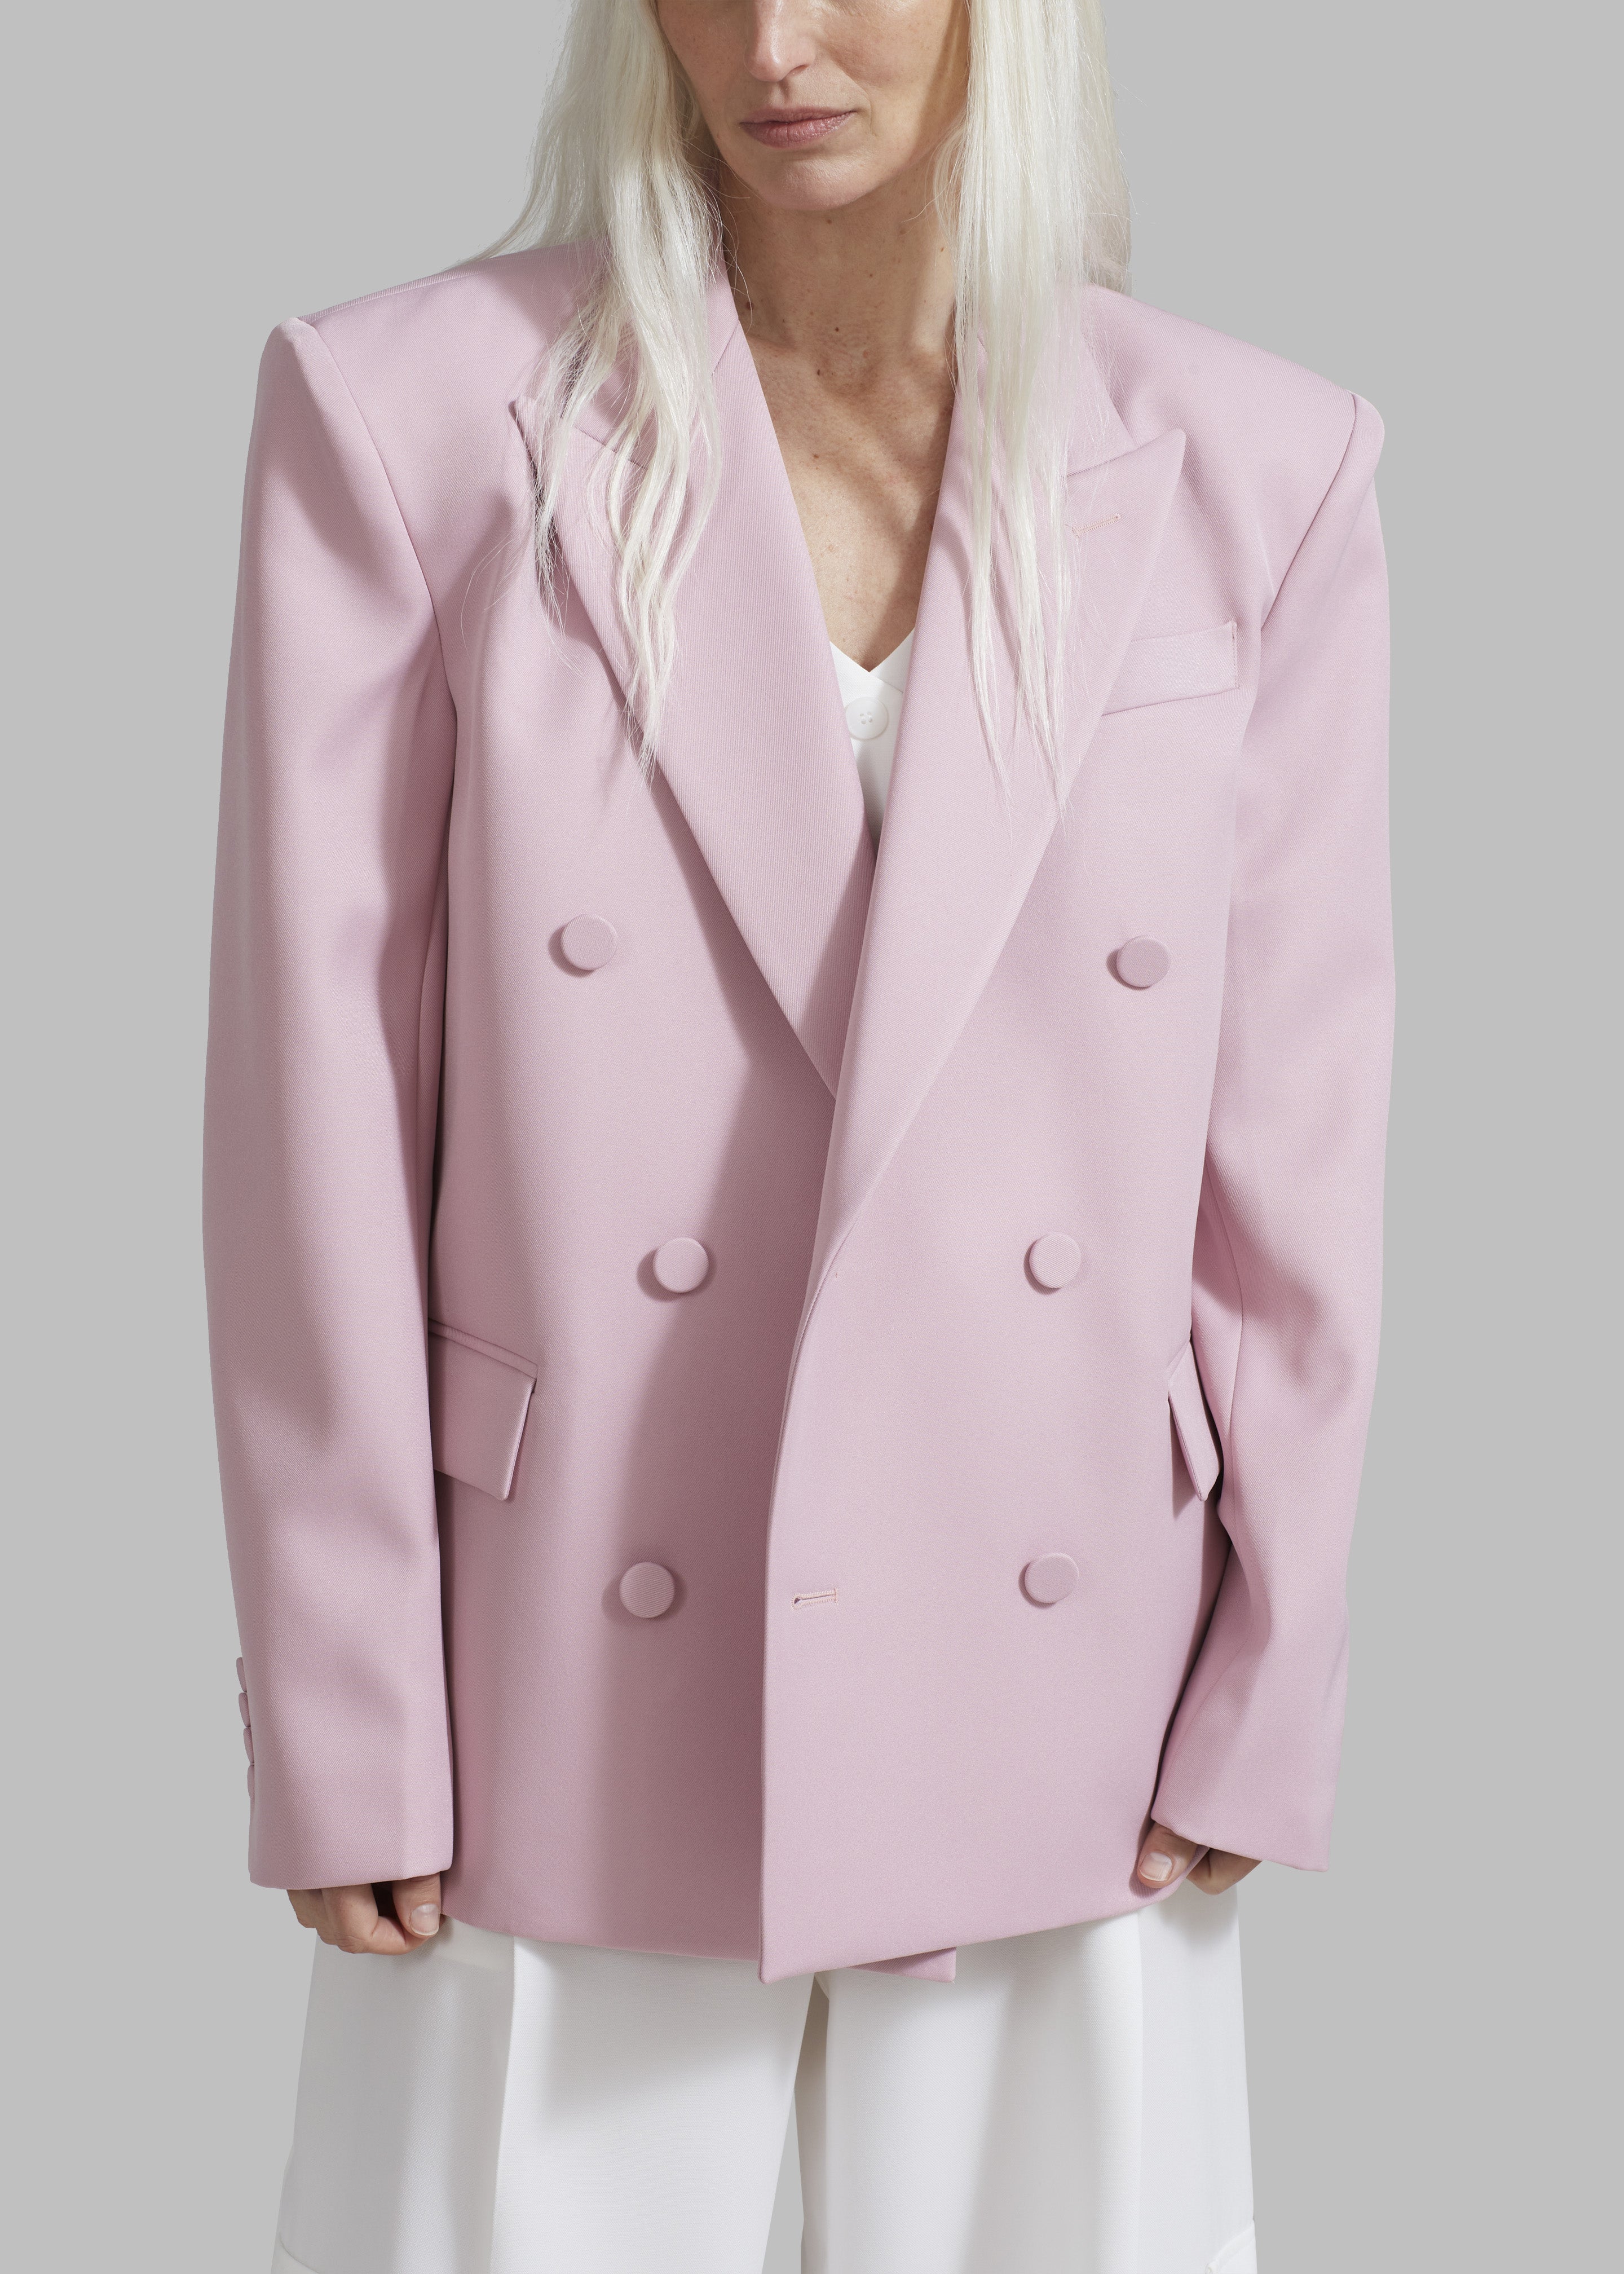 Zia Covered Buttons Blazer - Pink - 3